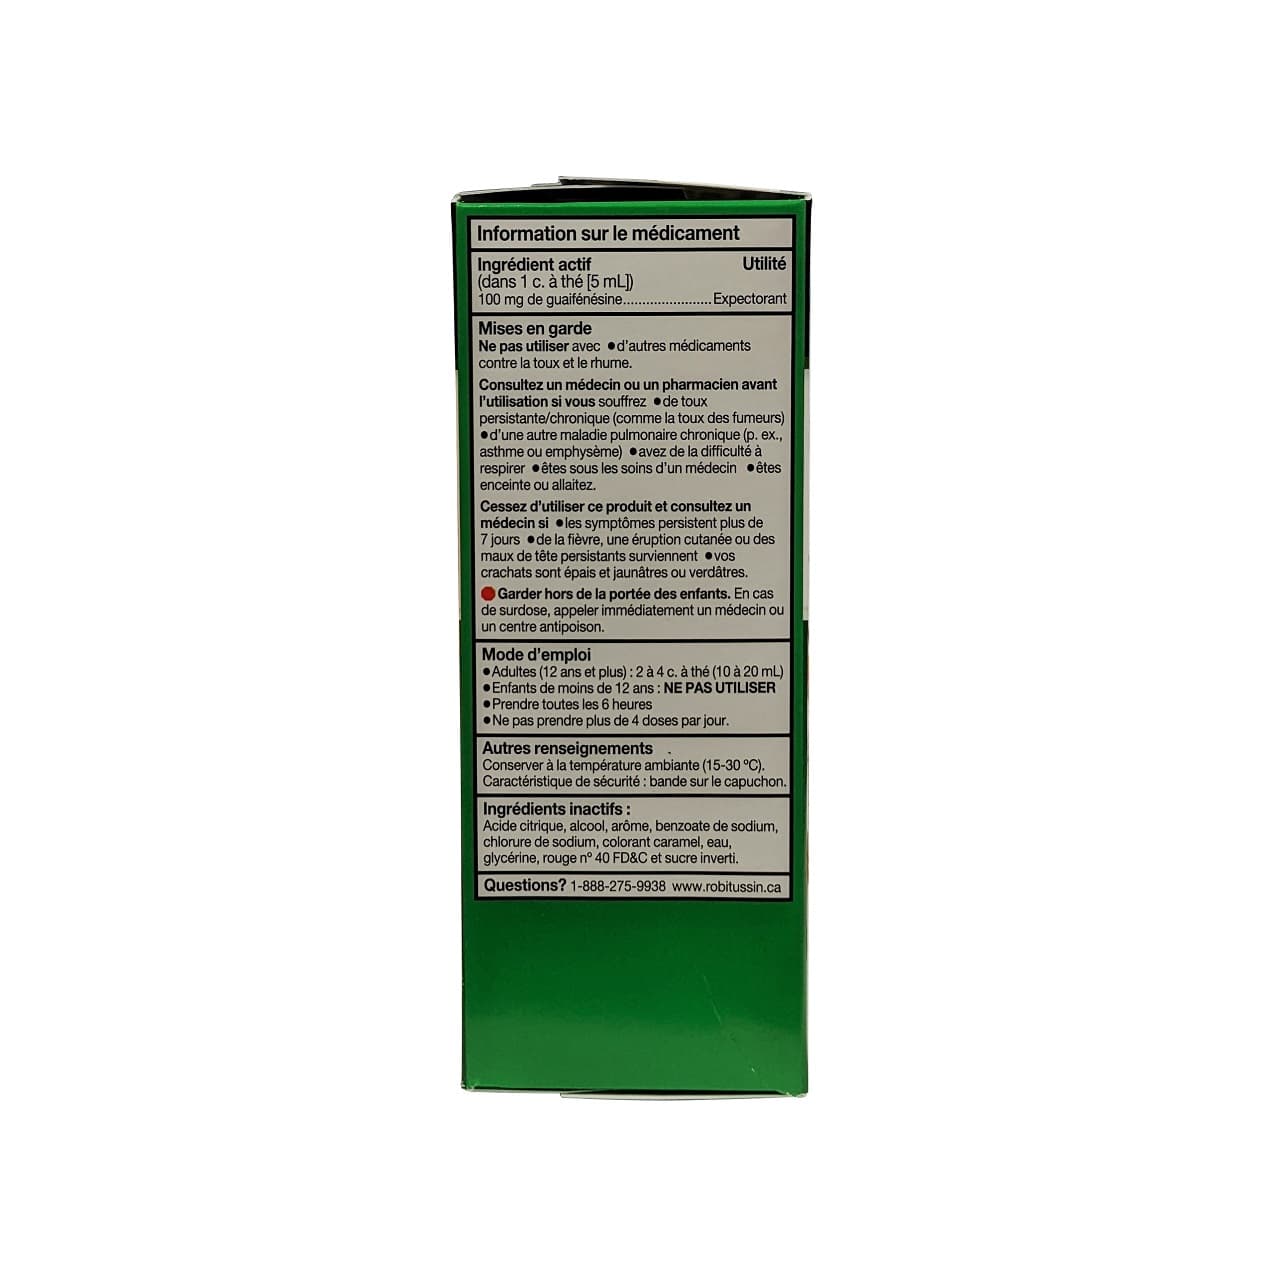 Ingredients, warnings, and directions for Robitussin Regular Strength Mucus & Phlegm for 6 Hours Relief (100 mL) in French